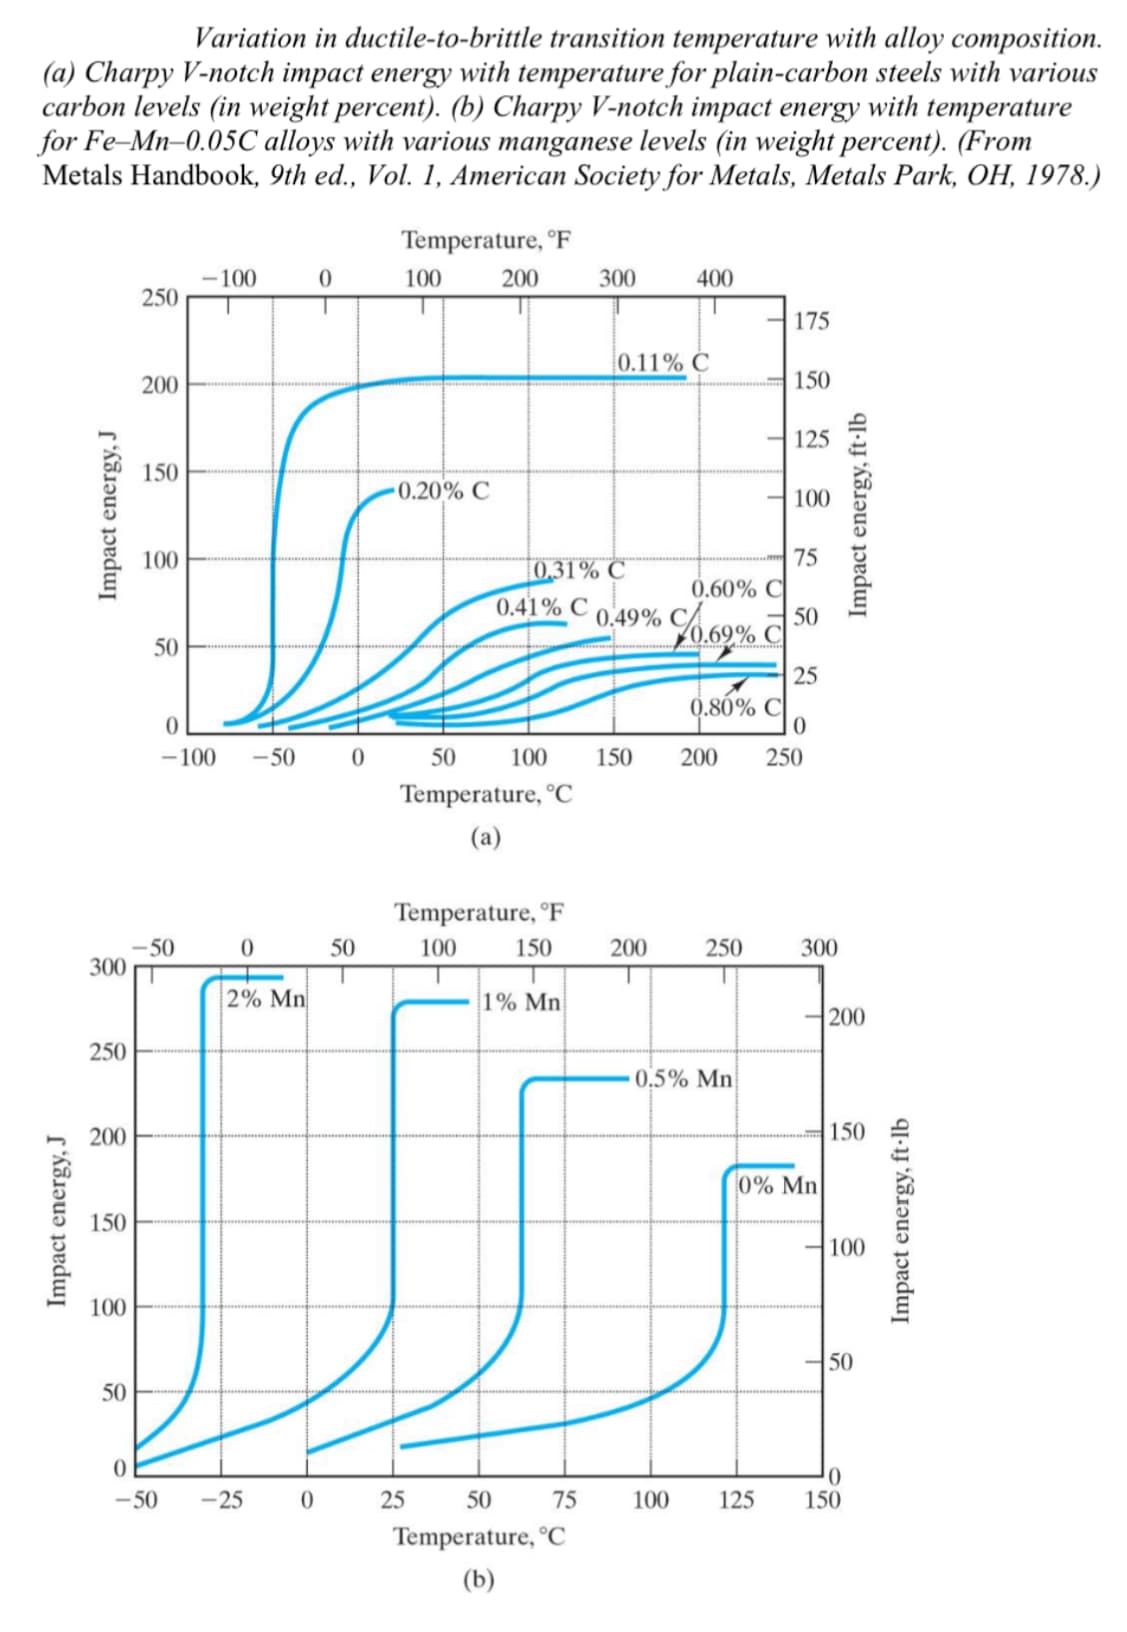 Variation in ductile-to-brittle transition temperature with alloy composition.
(a) Charpy V-notch impact energy with temperature for plain-carbon steels with various
carbon levels (in weight percent). (b) Charpy V-notch impact energy with temperature
for Fe-Mn-0.05C alloys with various manganese levels (in weight percent). (From
Metals Handbook, 9th ed., Vol. 1, American Society for Metals, Metals Park, OH, 1978.)
Impact energy, J
Impact energy, J
300
250
200
150
100
50
250
200
150
100
50
-50
0
-50
-100
-100
0
2% Mn
-25
0
Temperature, F
-50 0 50
50
100
0.20% C
200
100
Temperature, °C
(a)
0 25
0.41% C
0,31% C
Temperature, F
100
150
1% Mn
300
50
75
Temperature, ��C
(b)
0.11% C
150
400
200
100
0.80% C
T
0.60% C
0.49% 69% 50
25
250
0.5% Mn
175
150
125
125
100
0
200 250
75
300
0% Mn
T
Impact energy, ft-lb
200
150
100
50
0
150
Impact energy, ft-lb